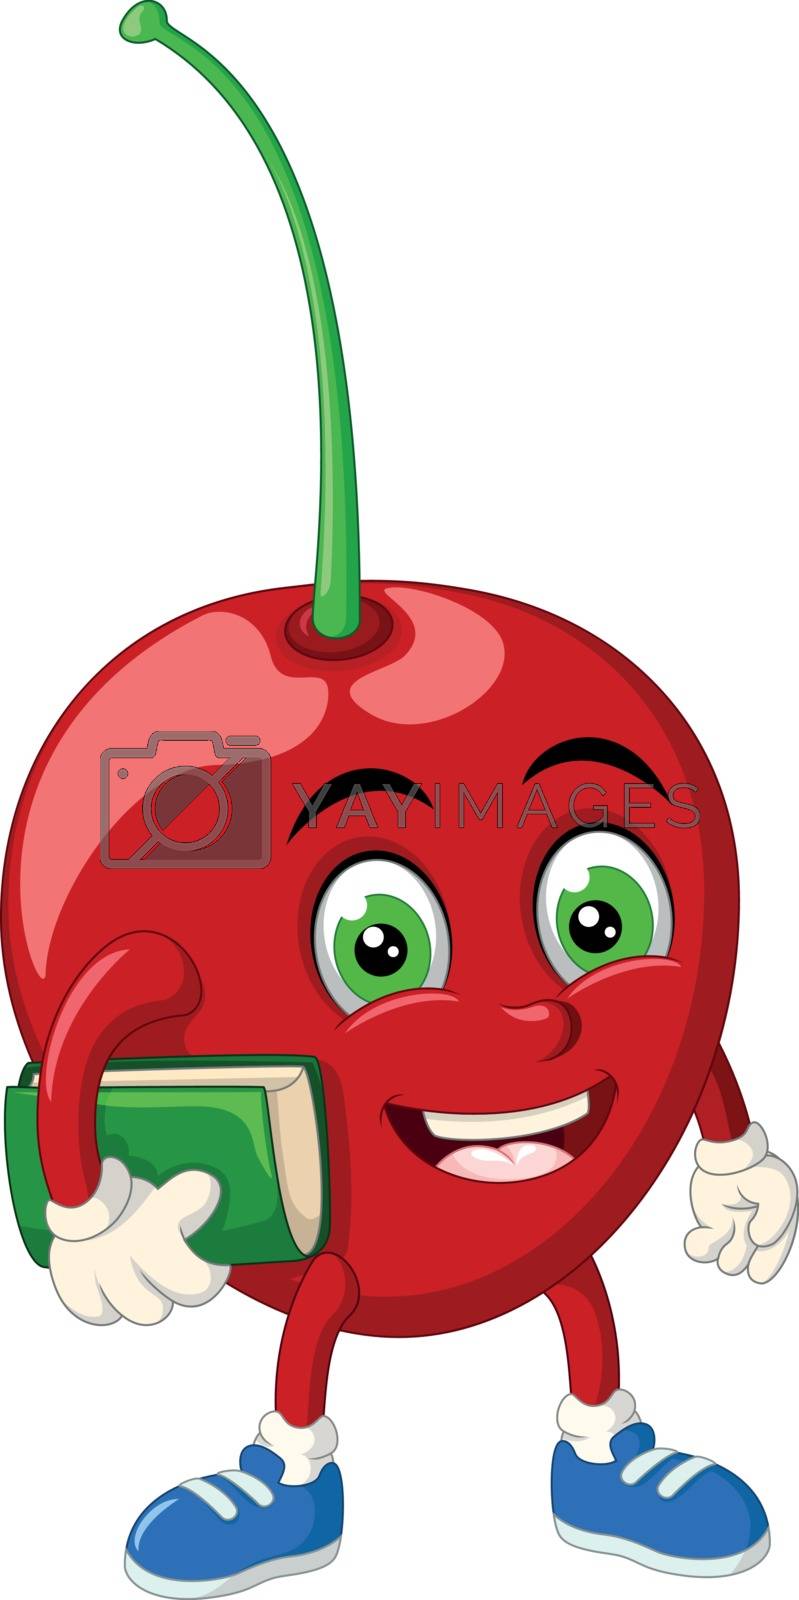 Royalty Free Vector | Red Cherry Fruit Hold Green Book Cartoon by sujono